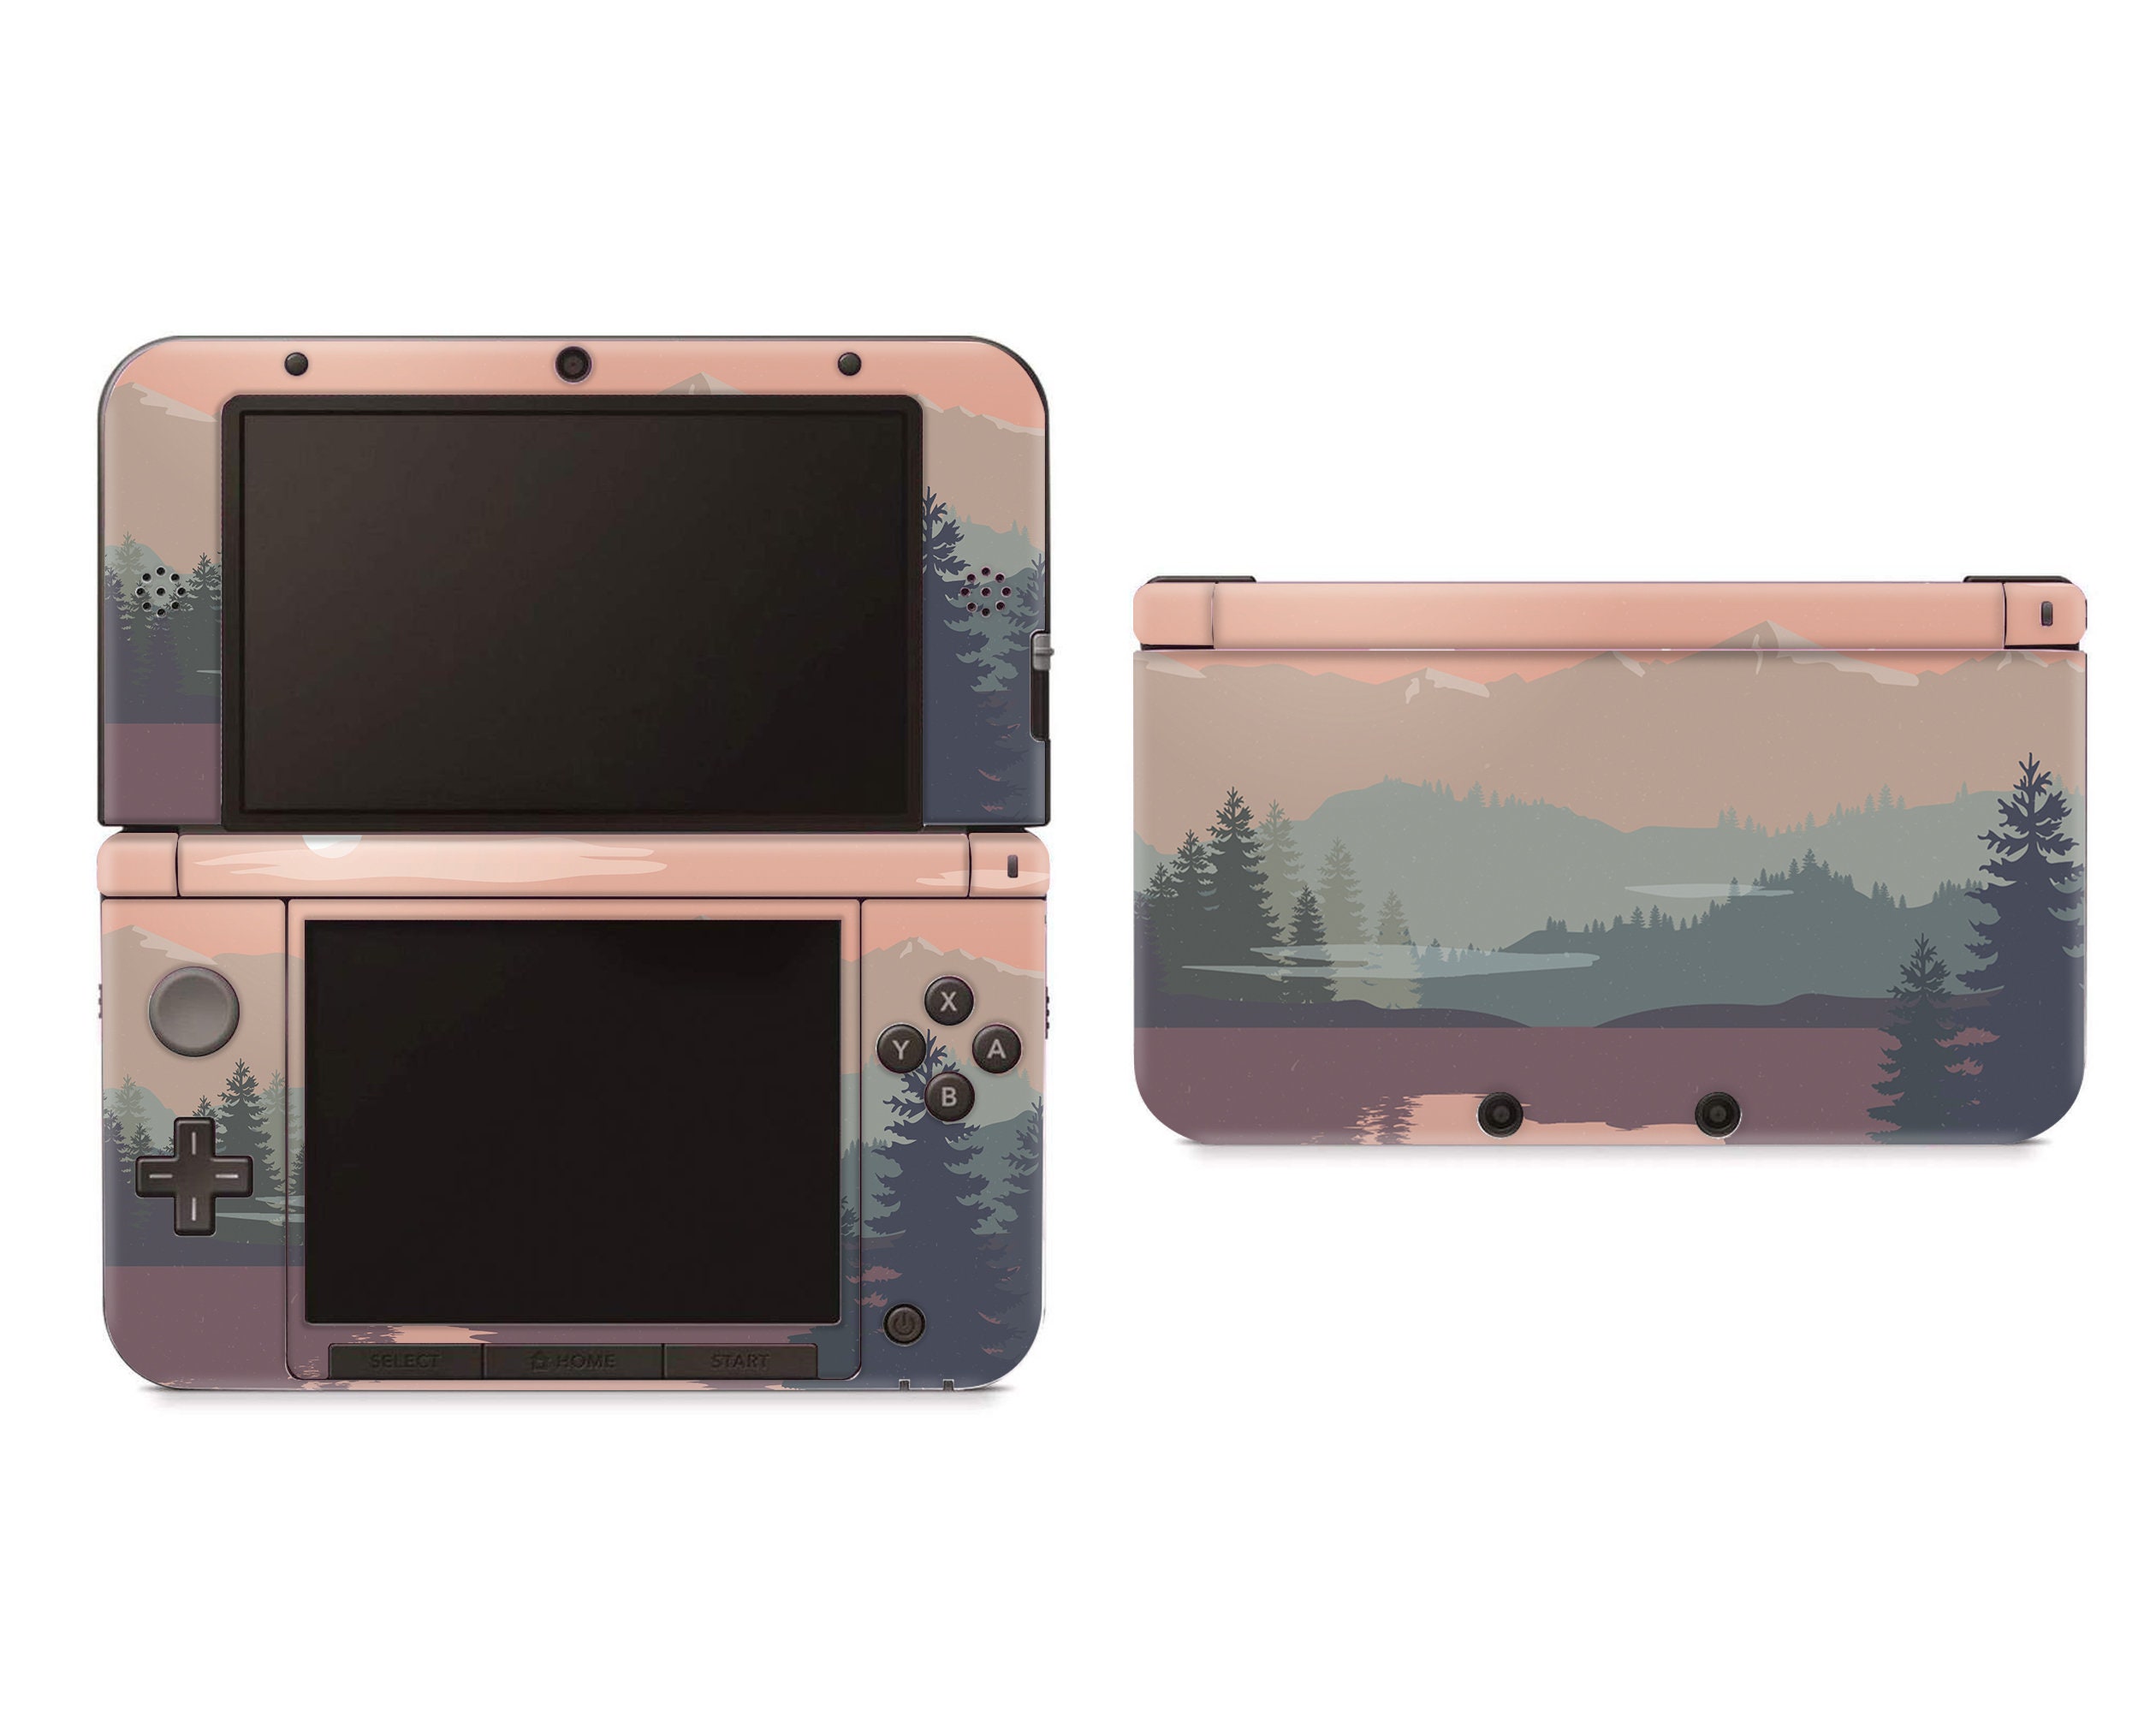 Nature Skin for Nintendo 3DS Lake the Mountains Decal - Etsy